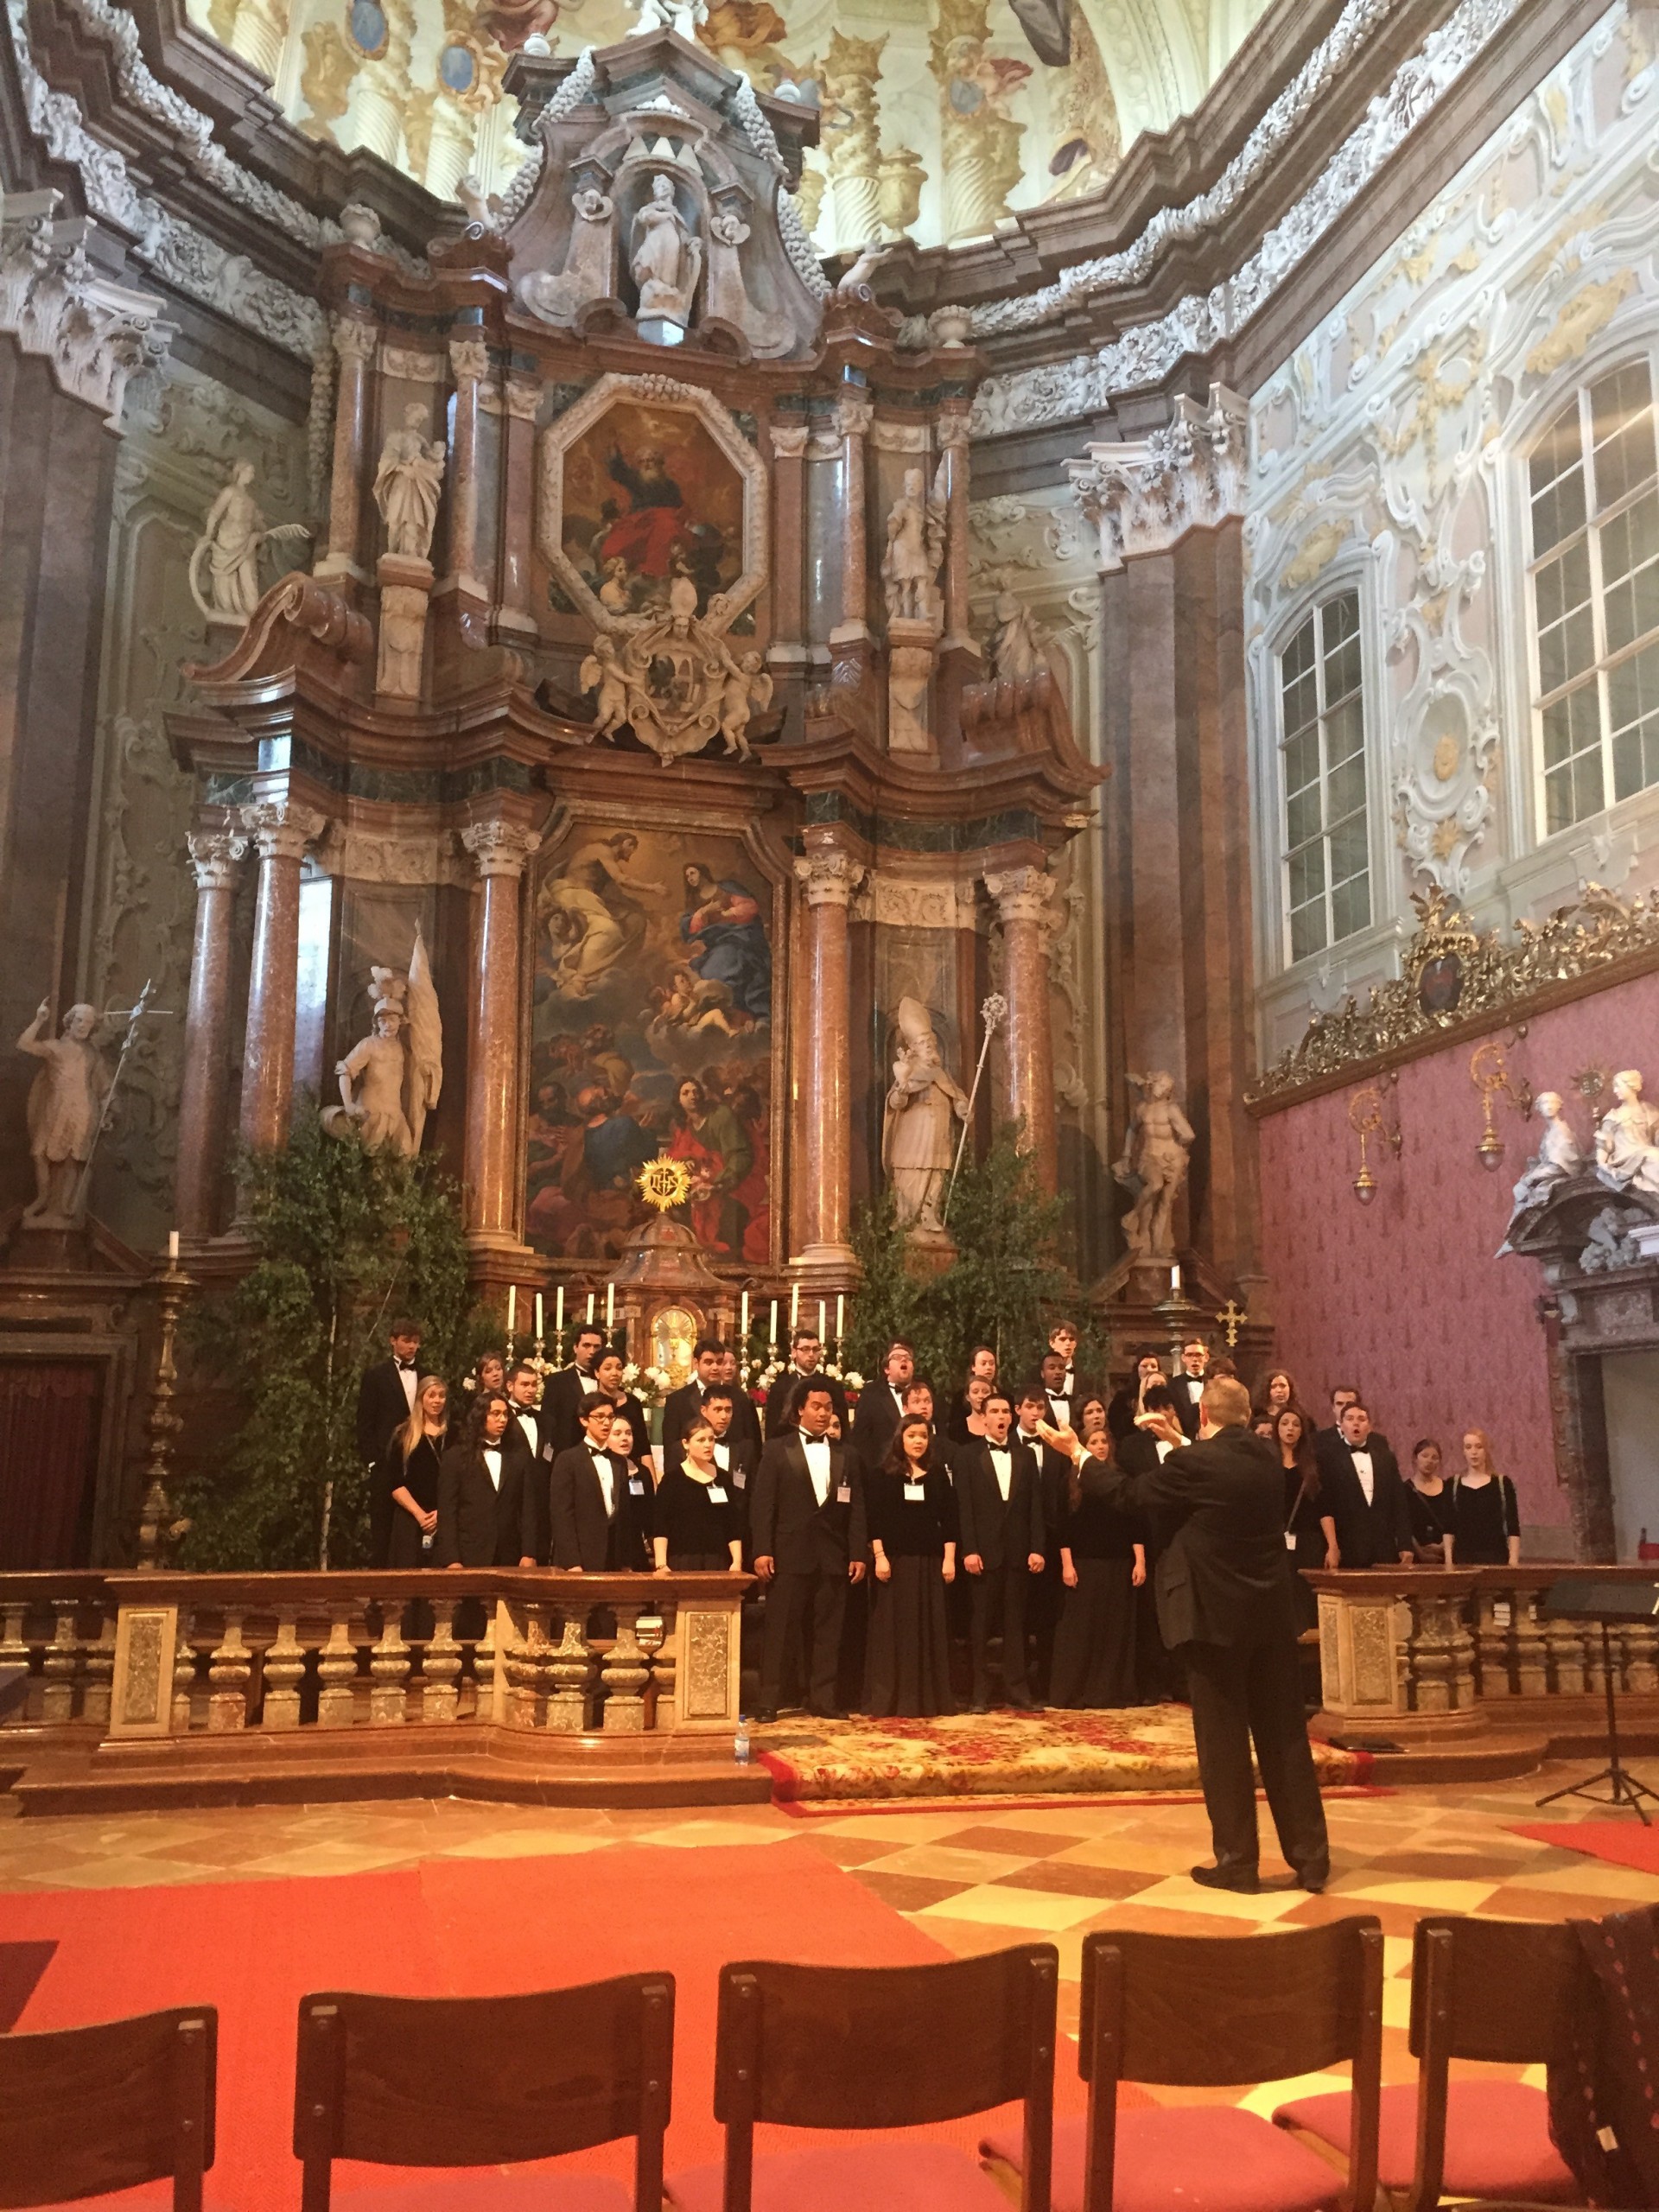 The Choir sang in churches and venues in Stockholm, Copenhagen, Prague and the Brucknerhaus in Linz. They sang in Martin Luther’s home church in Wittenberg, Germany, as well as the Thomaskirche in Leipzig, where J.S. Bach worked for 37 years.